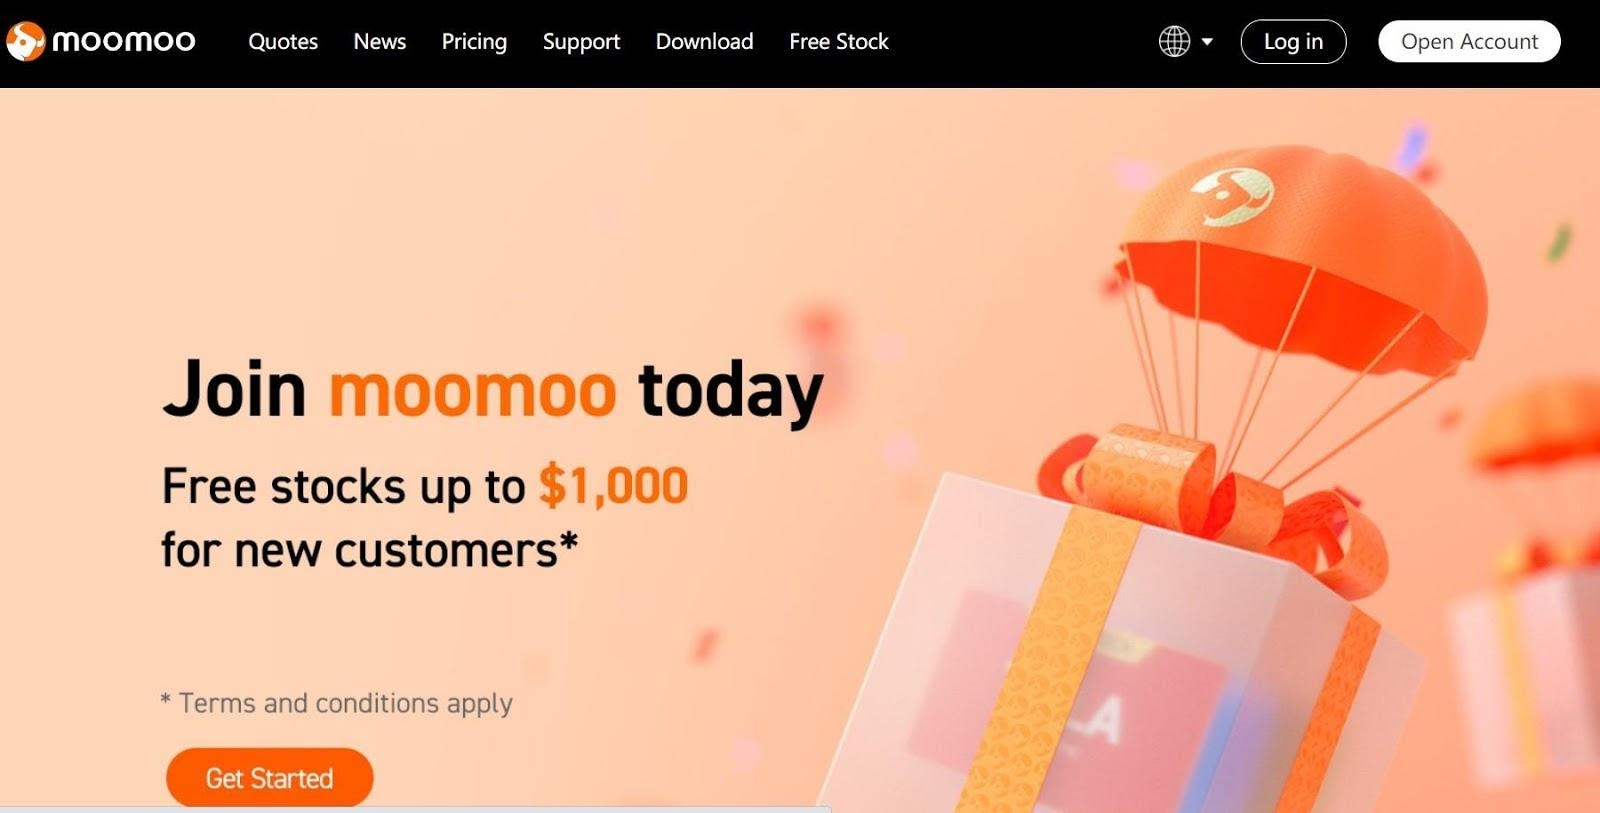 Moomoo Review - Open an account